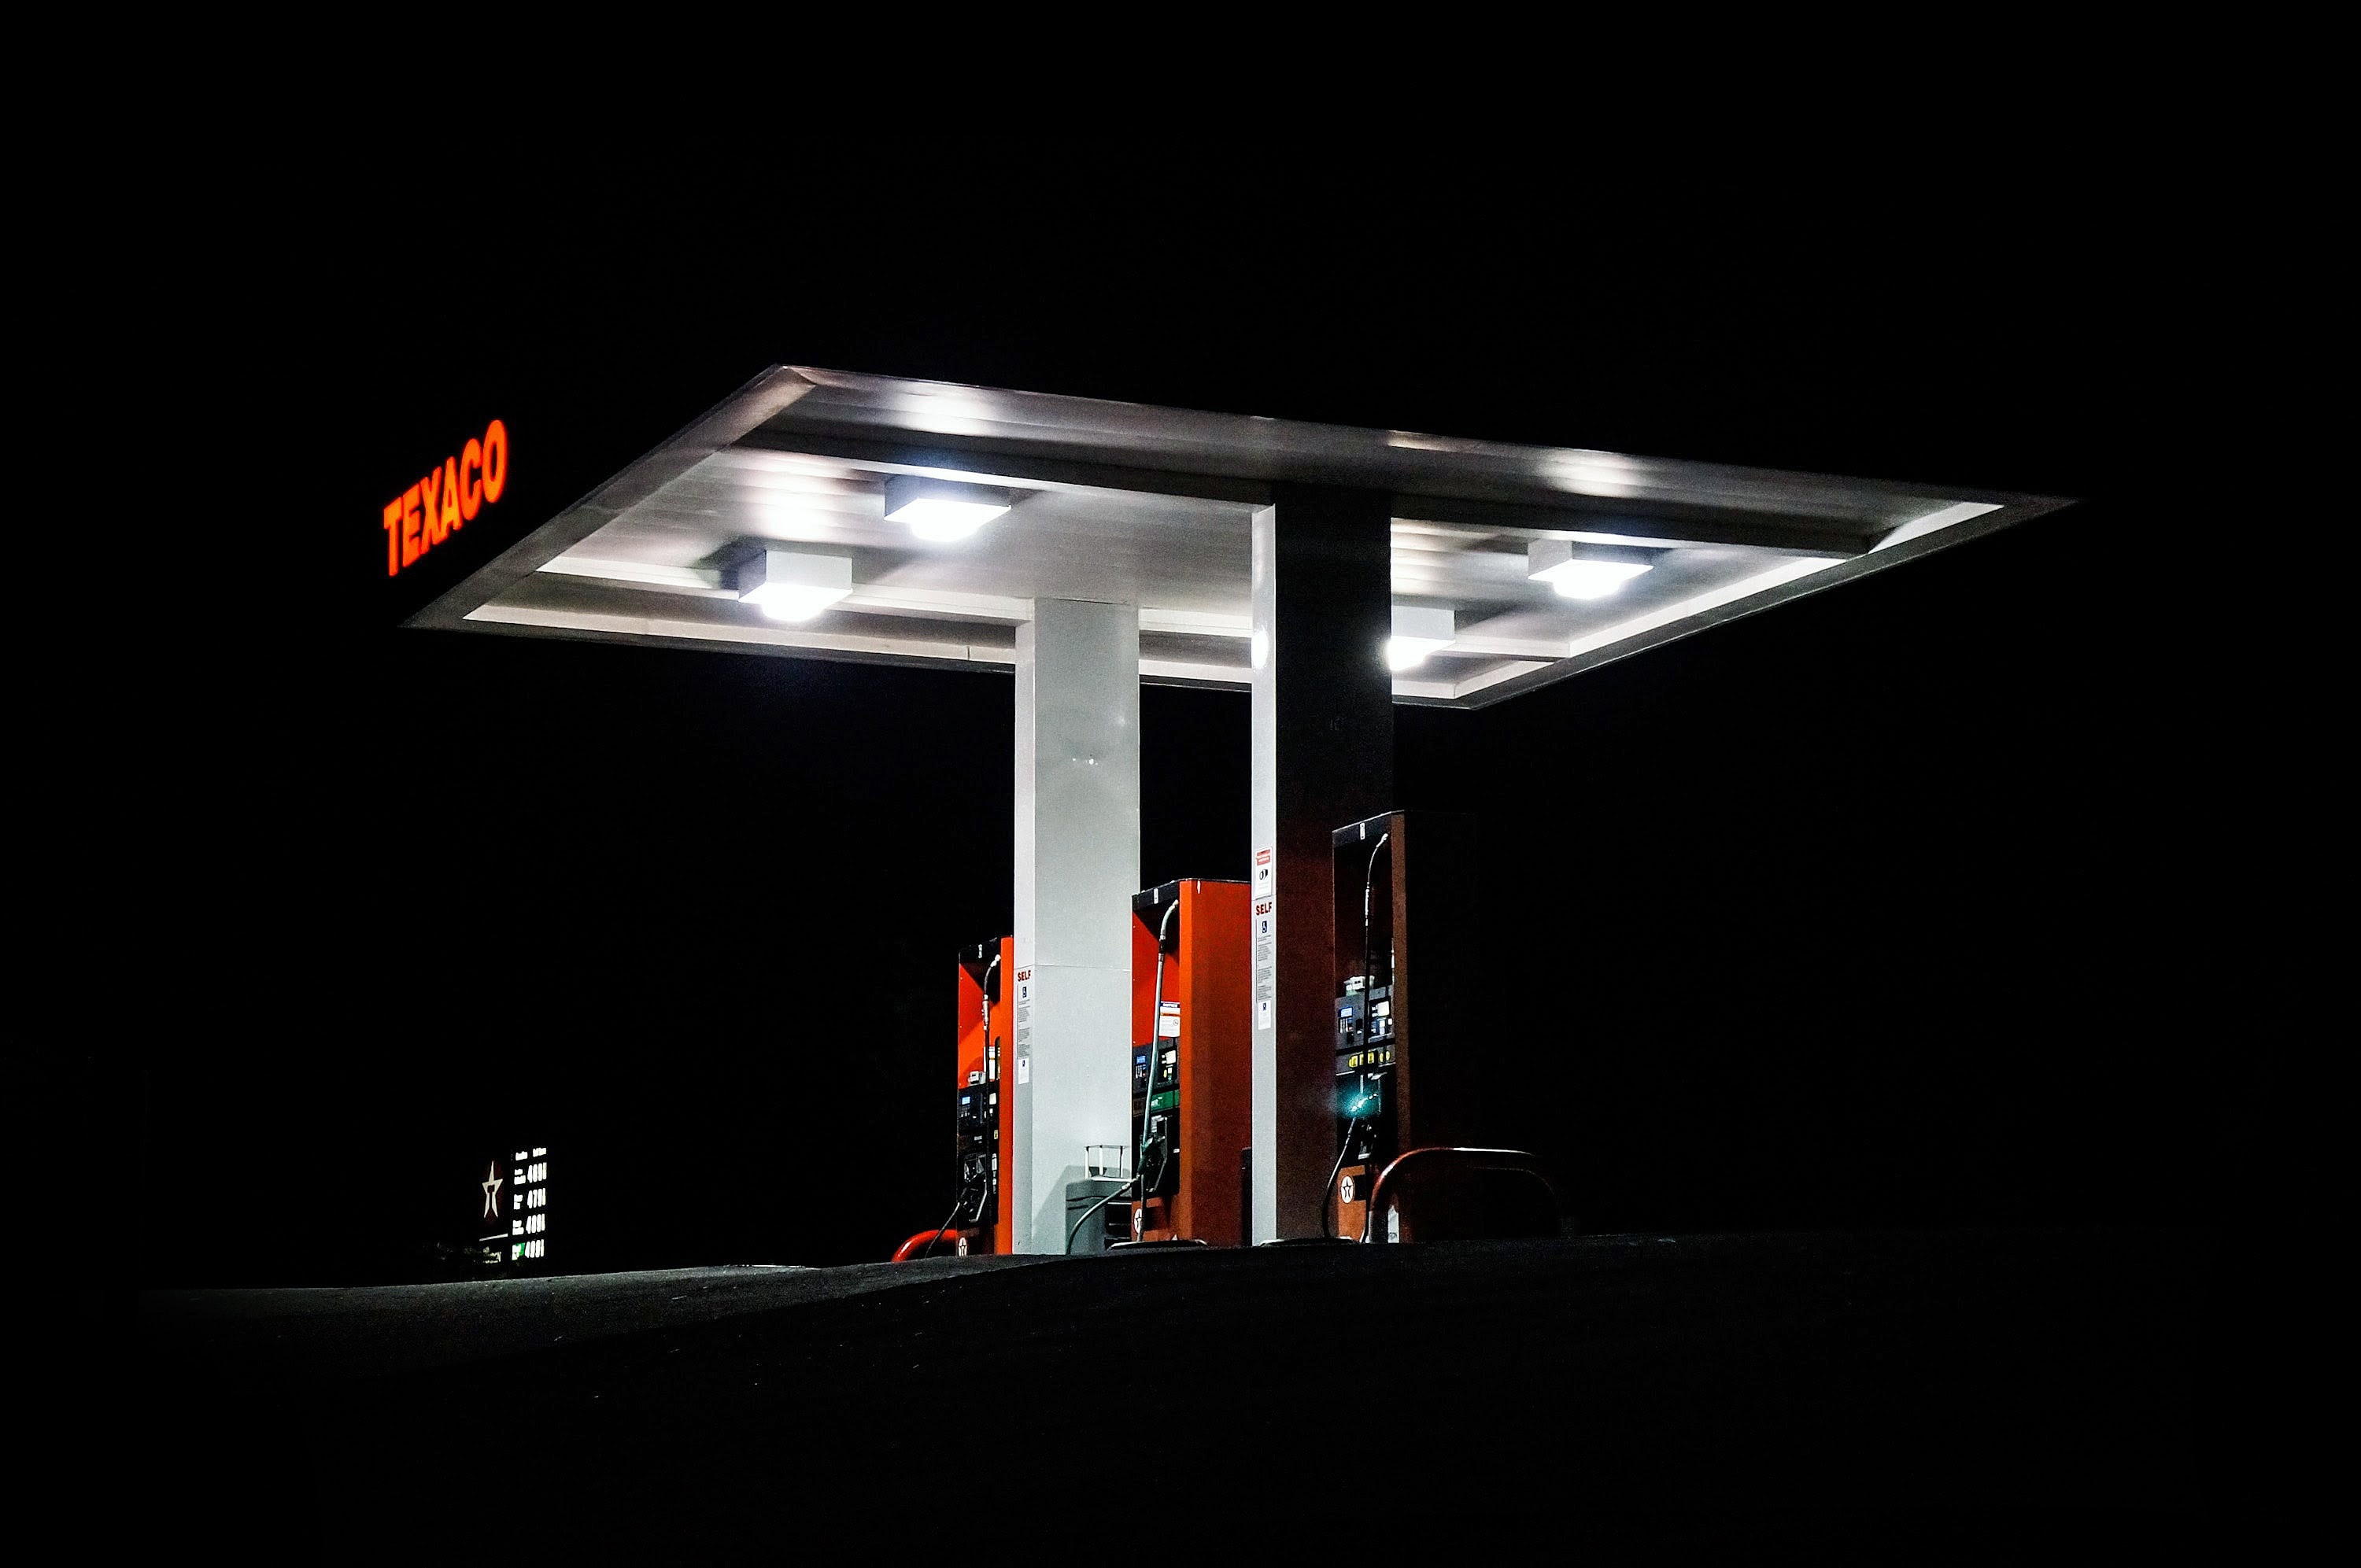 side angle photo of a texaco gas station taken at night